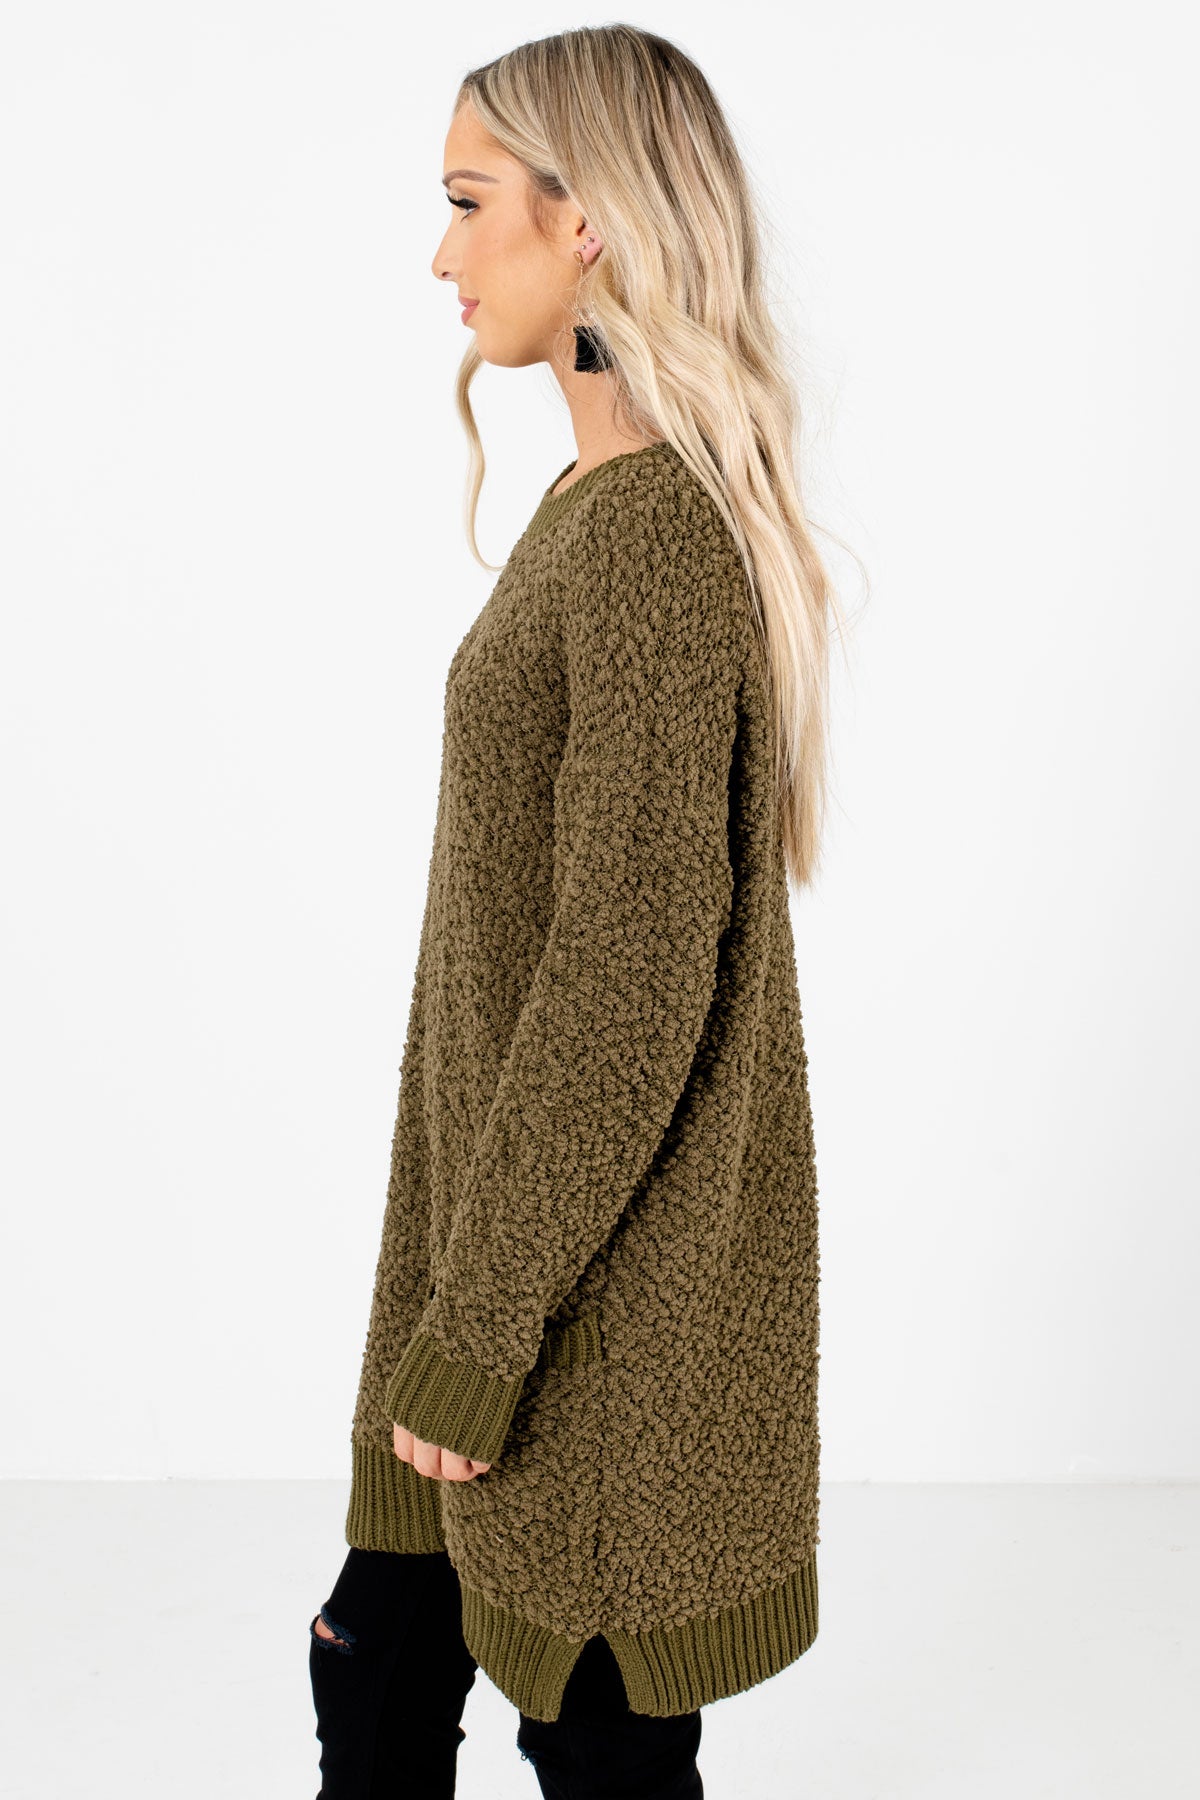 Olive Green Boutique Sweaters with Pockets for Women